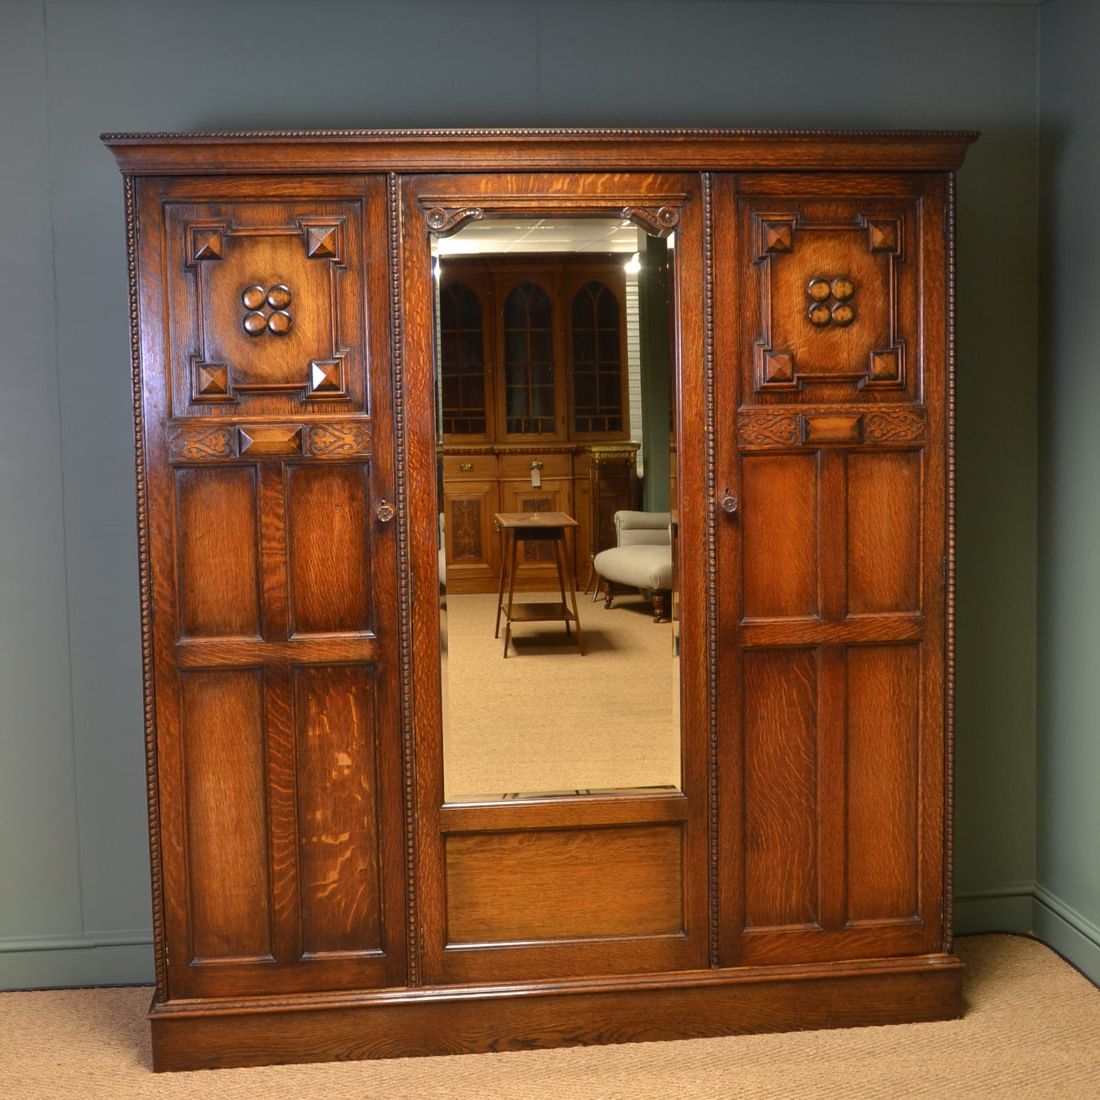 Antique Wardrobes For Sale – Victorian, Georgian & Edwardian Regarding Victorian Wardrobes For Sale (View 8 of 20)